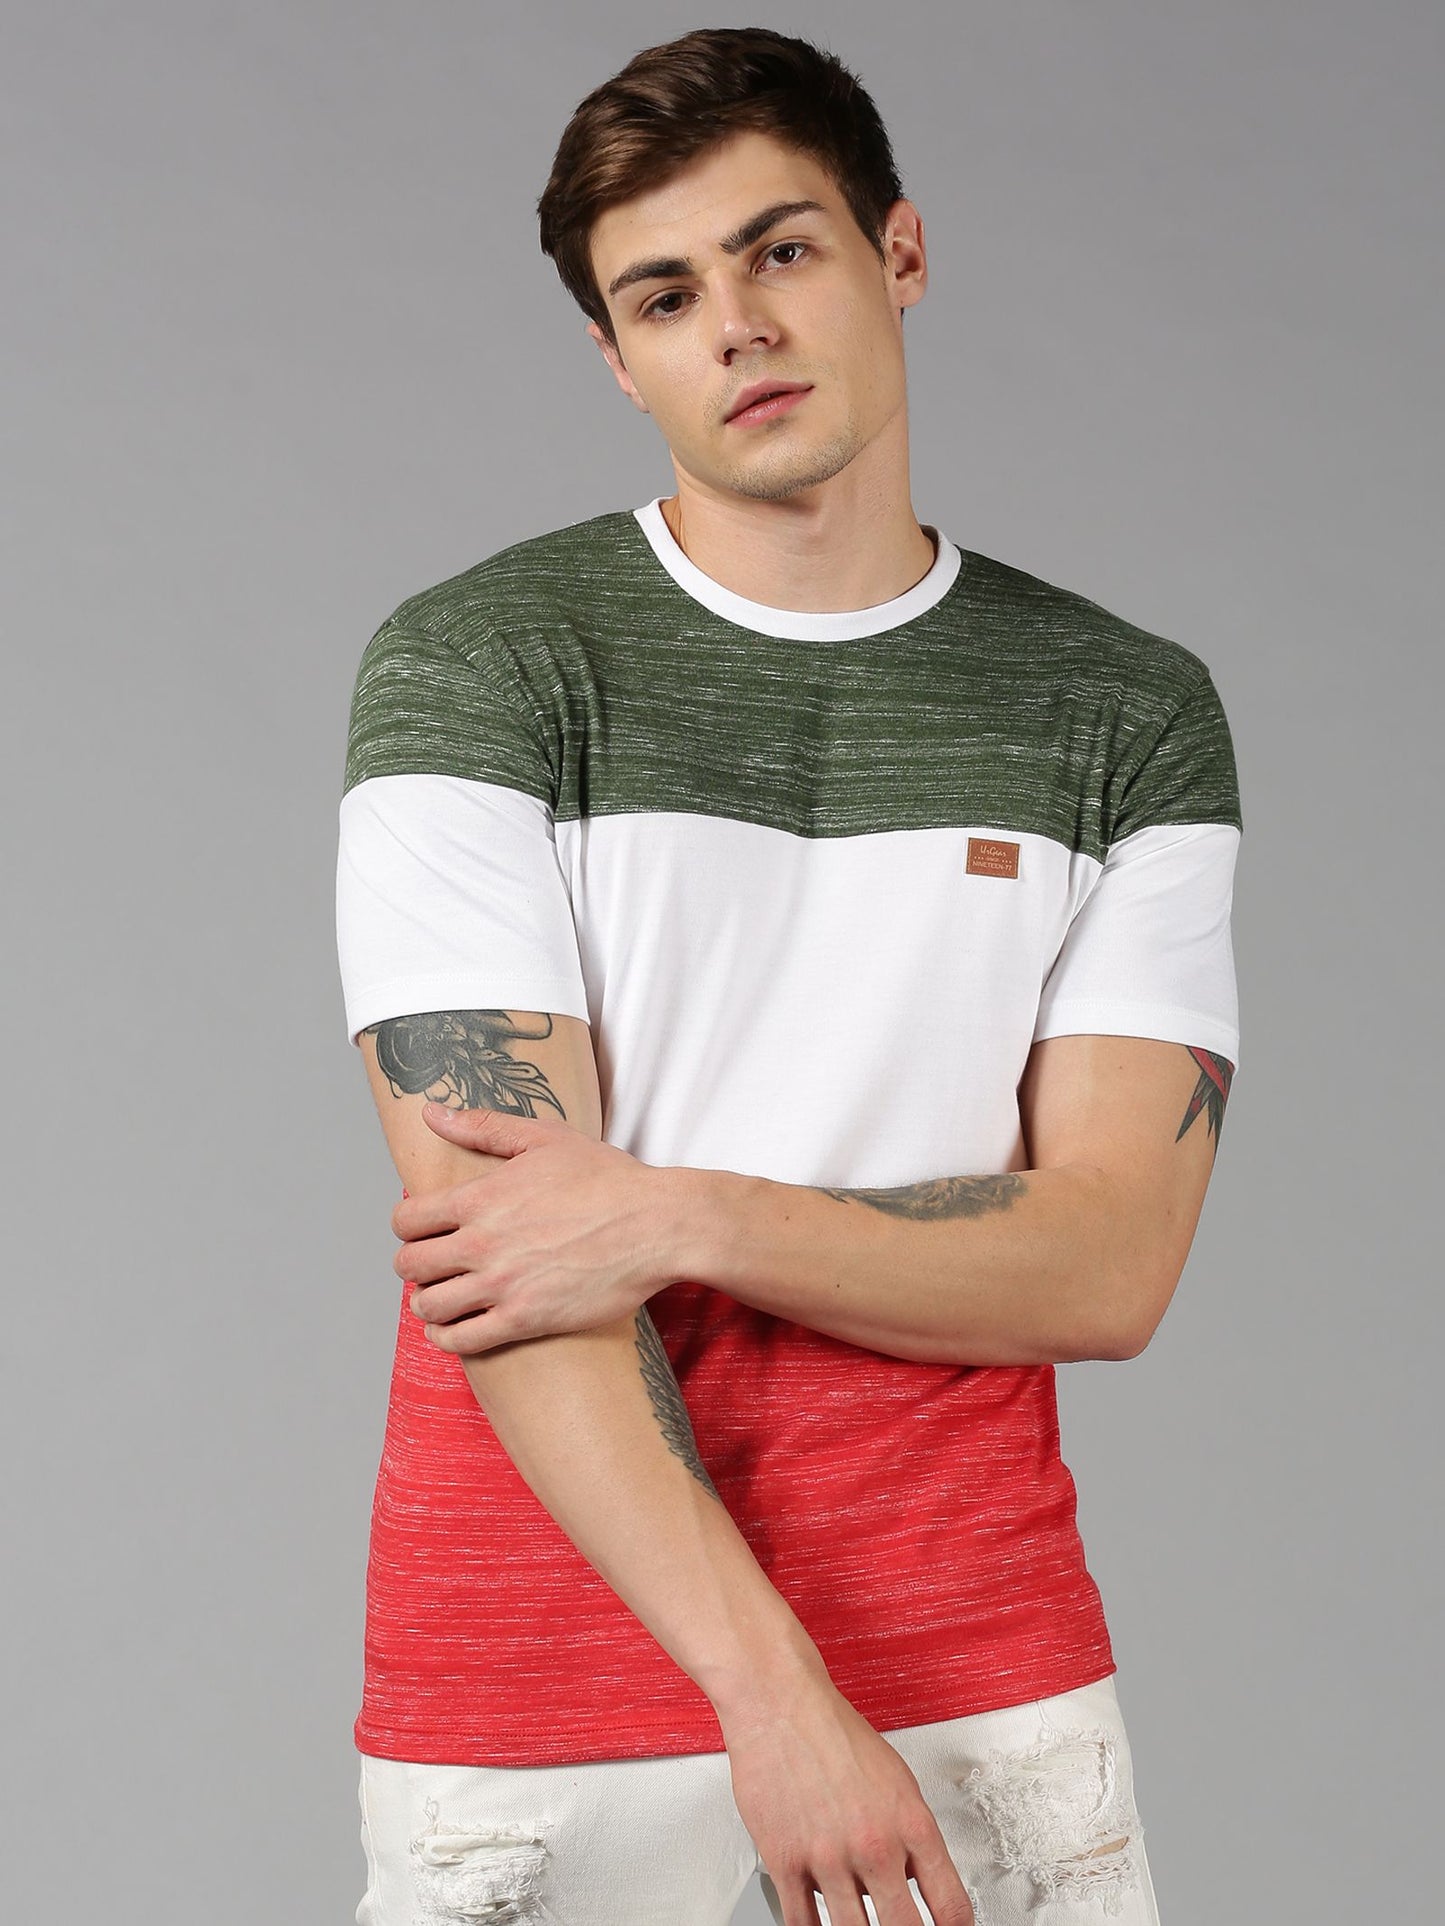 Swank Thraeds Cotton Color Block Half Sleeves Mens Round Neck T-Shirt